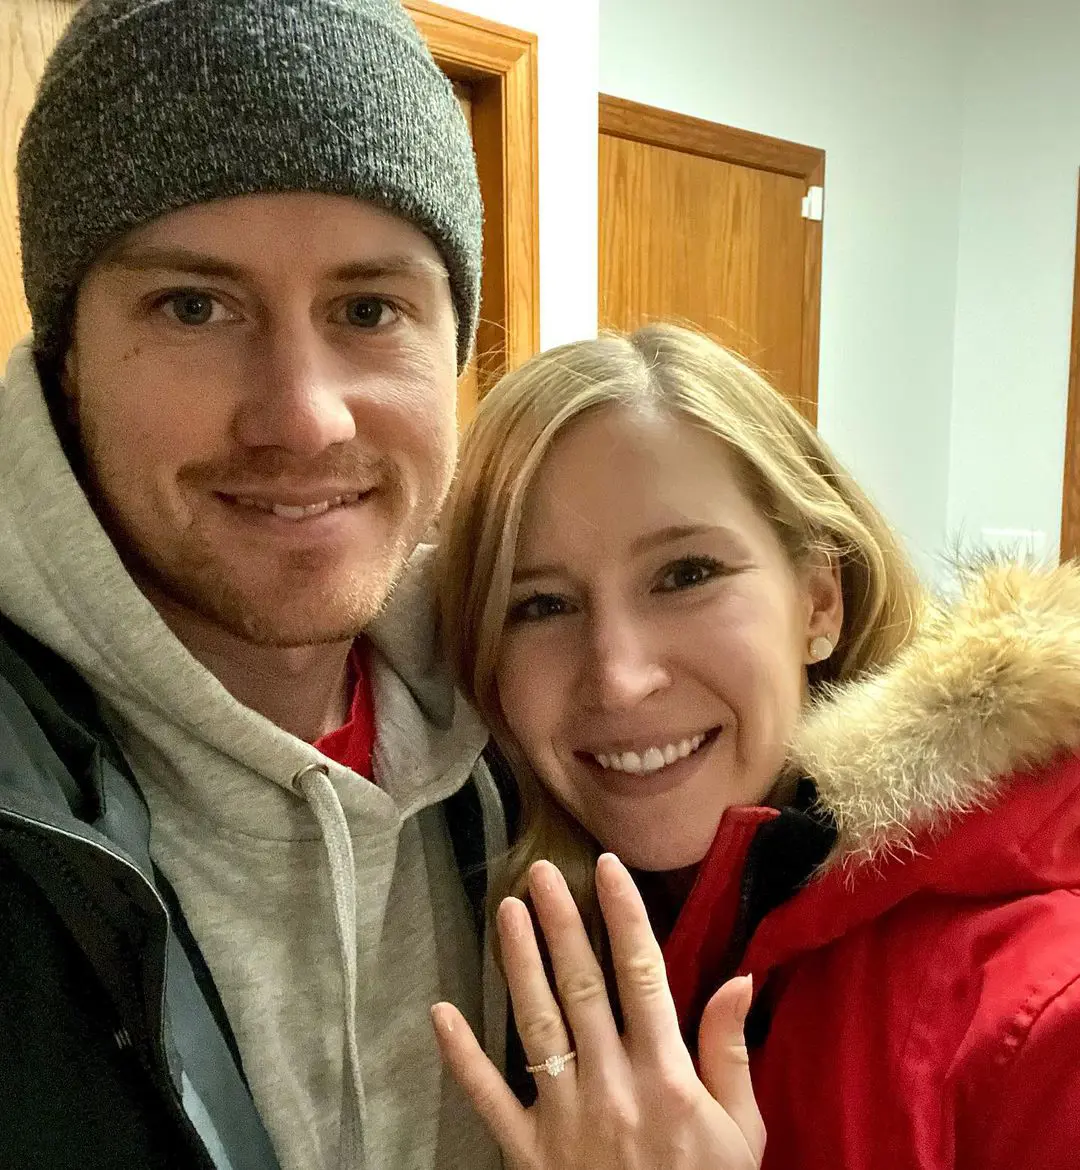 The athletic couple got engaged in December 2020.